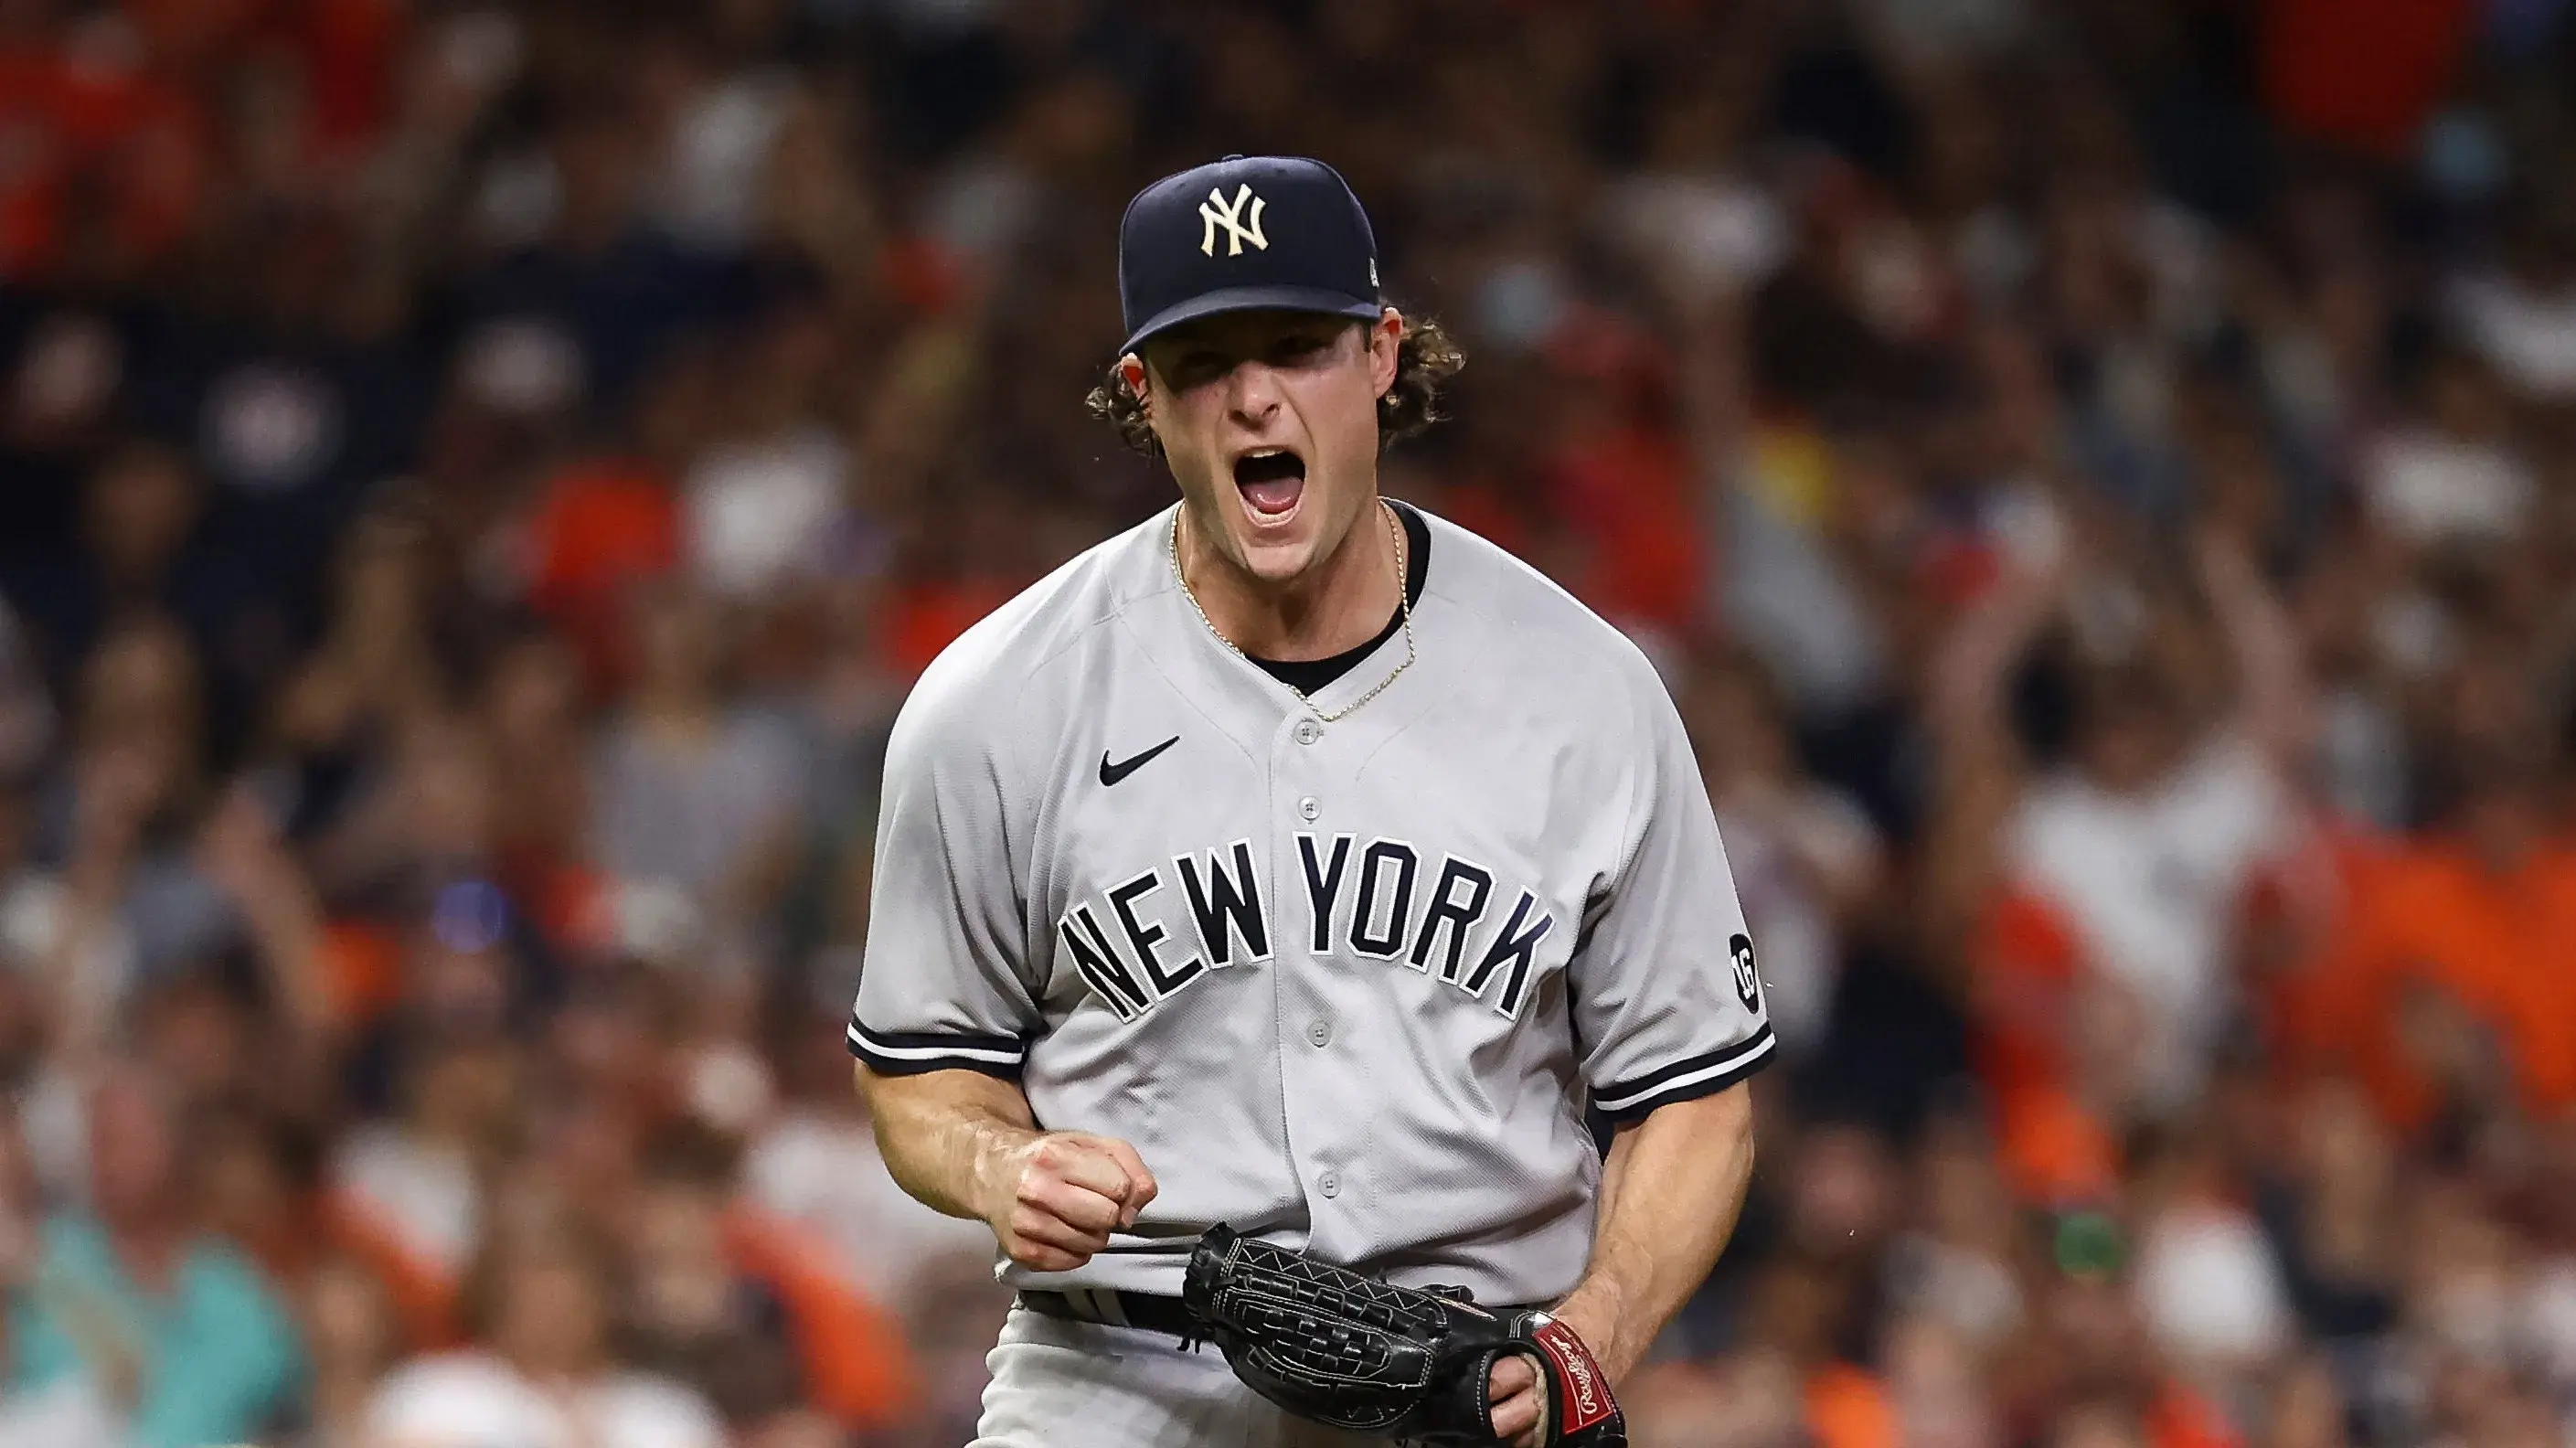 Jul 10, 2021; Houston, Texas, USA; New York Yankees starting pitcher Gerrit Cole (45) reacts after recording a strikeout against the Houston Astros to end the game at Minute Maid Park. Mandatory Credit: Troy Taormina-USA TODAY Sports / Troy Taormina-USA TODAY Sports